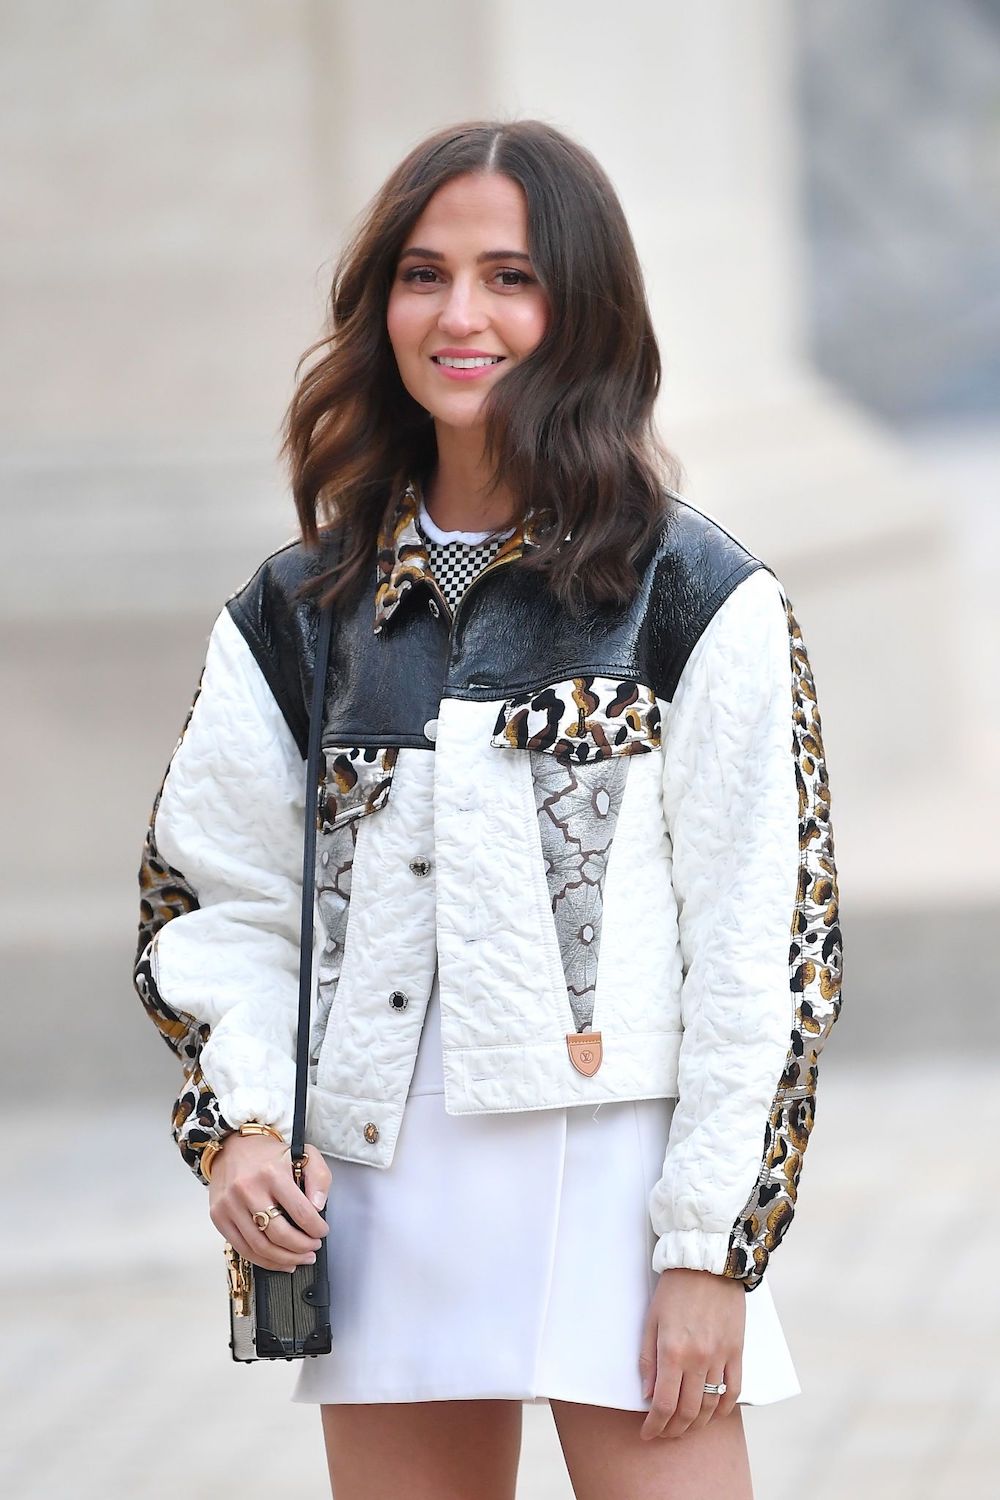 Alicia Vikander attended the star studded Louis Vuitton Spring Summer 2022 show during Paris Fashion Week with Ana De Armas on October 5, 2021.